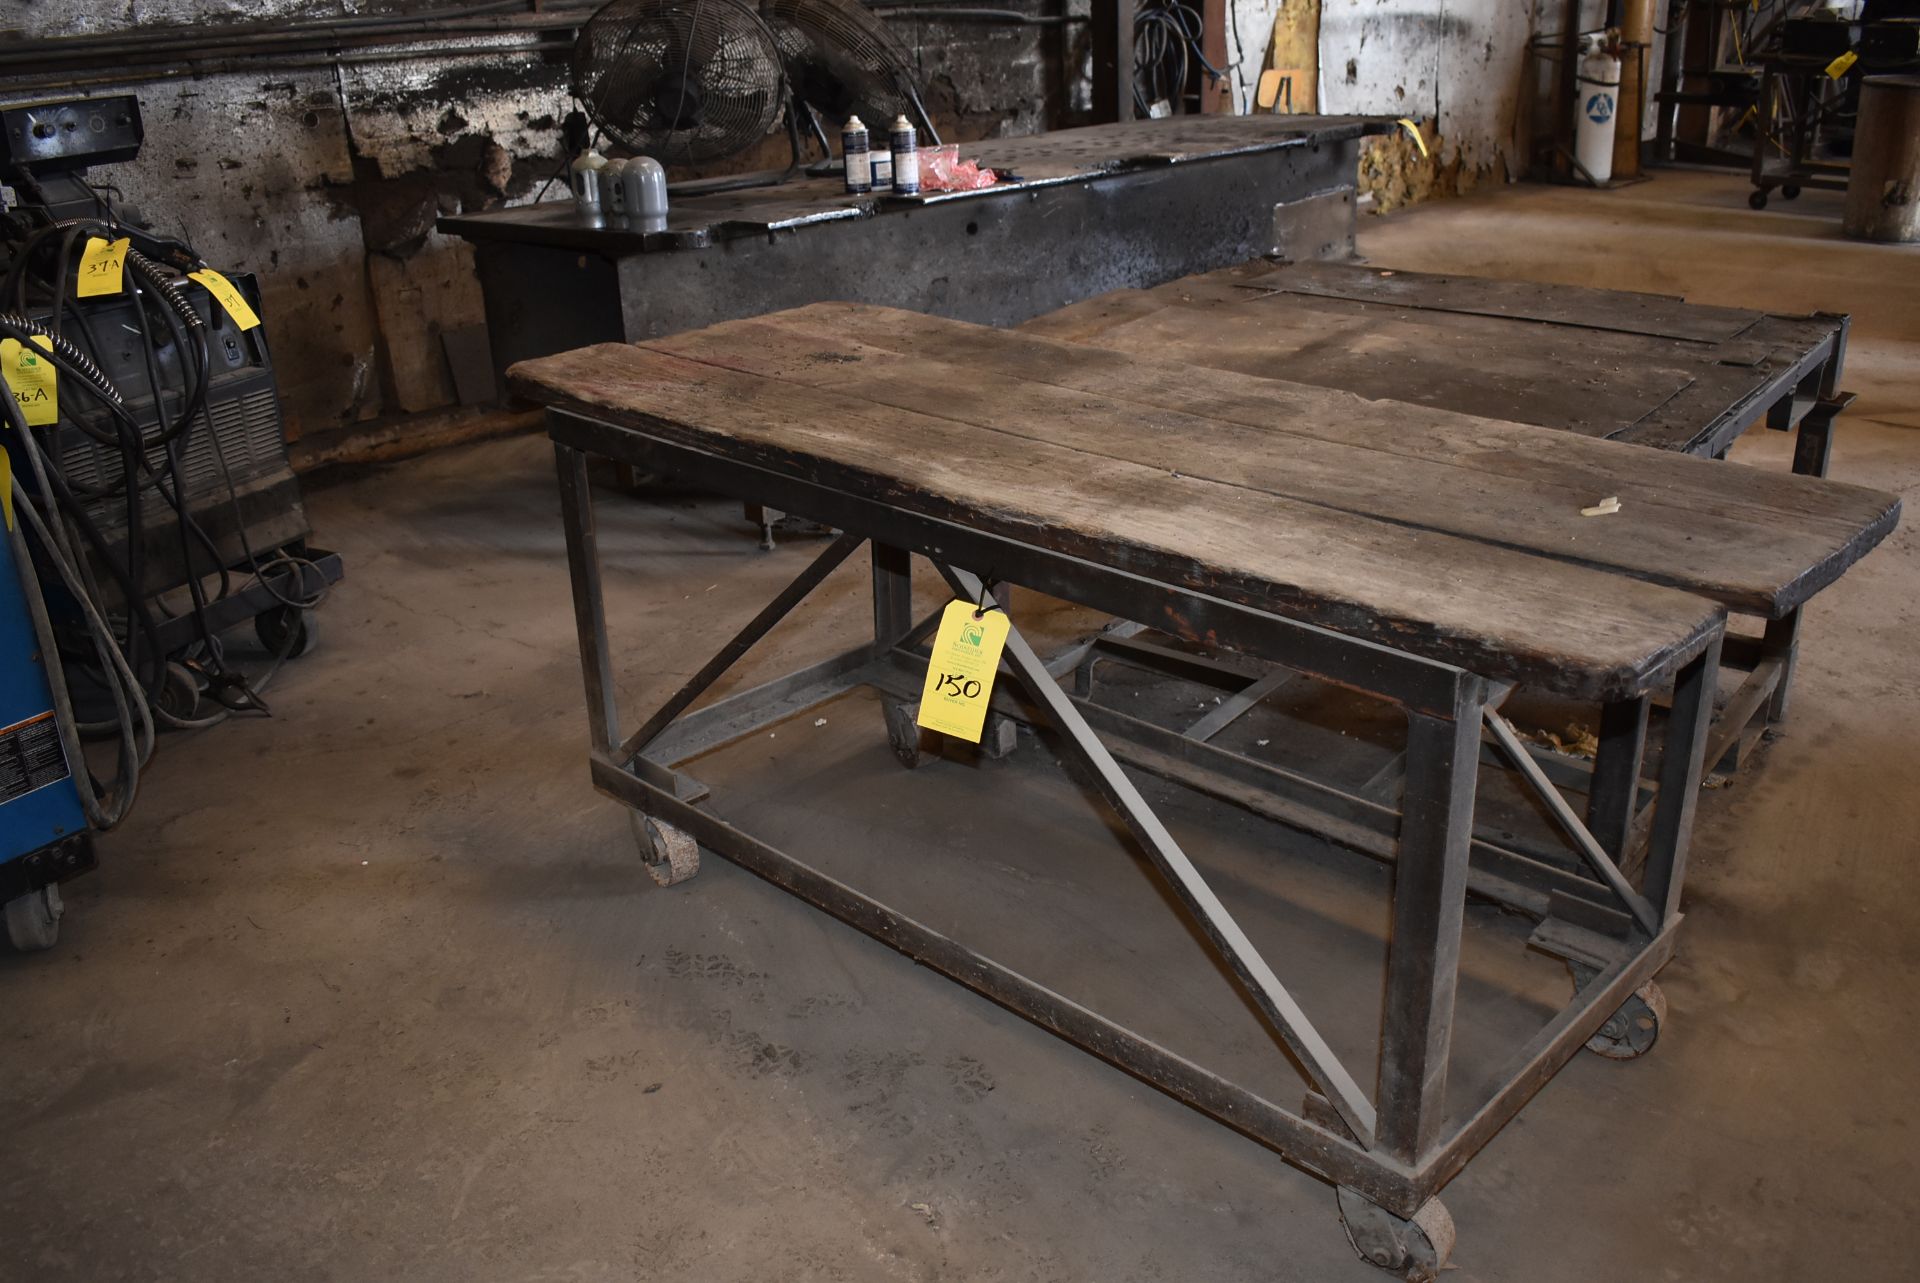 Shop Set Up Table, 6' Length, Mounted on Casters